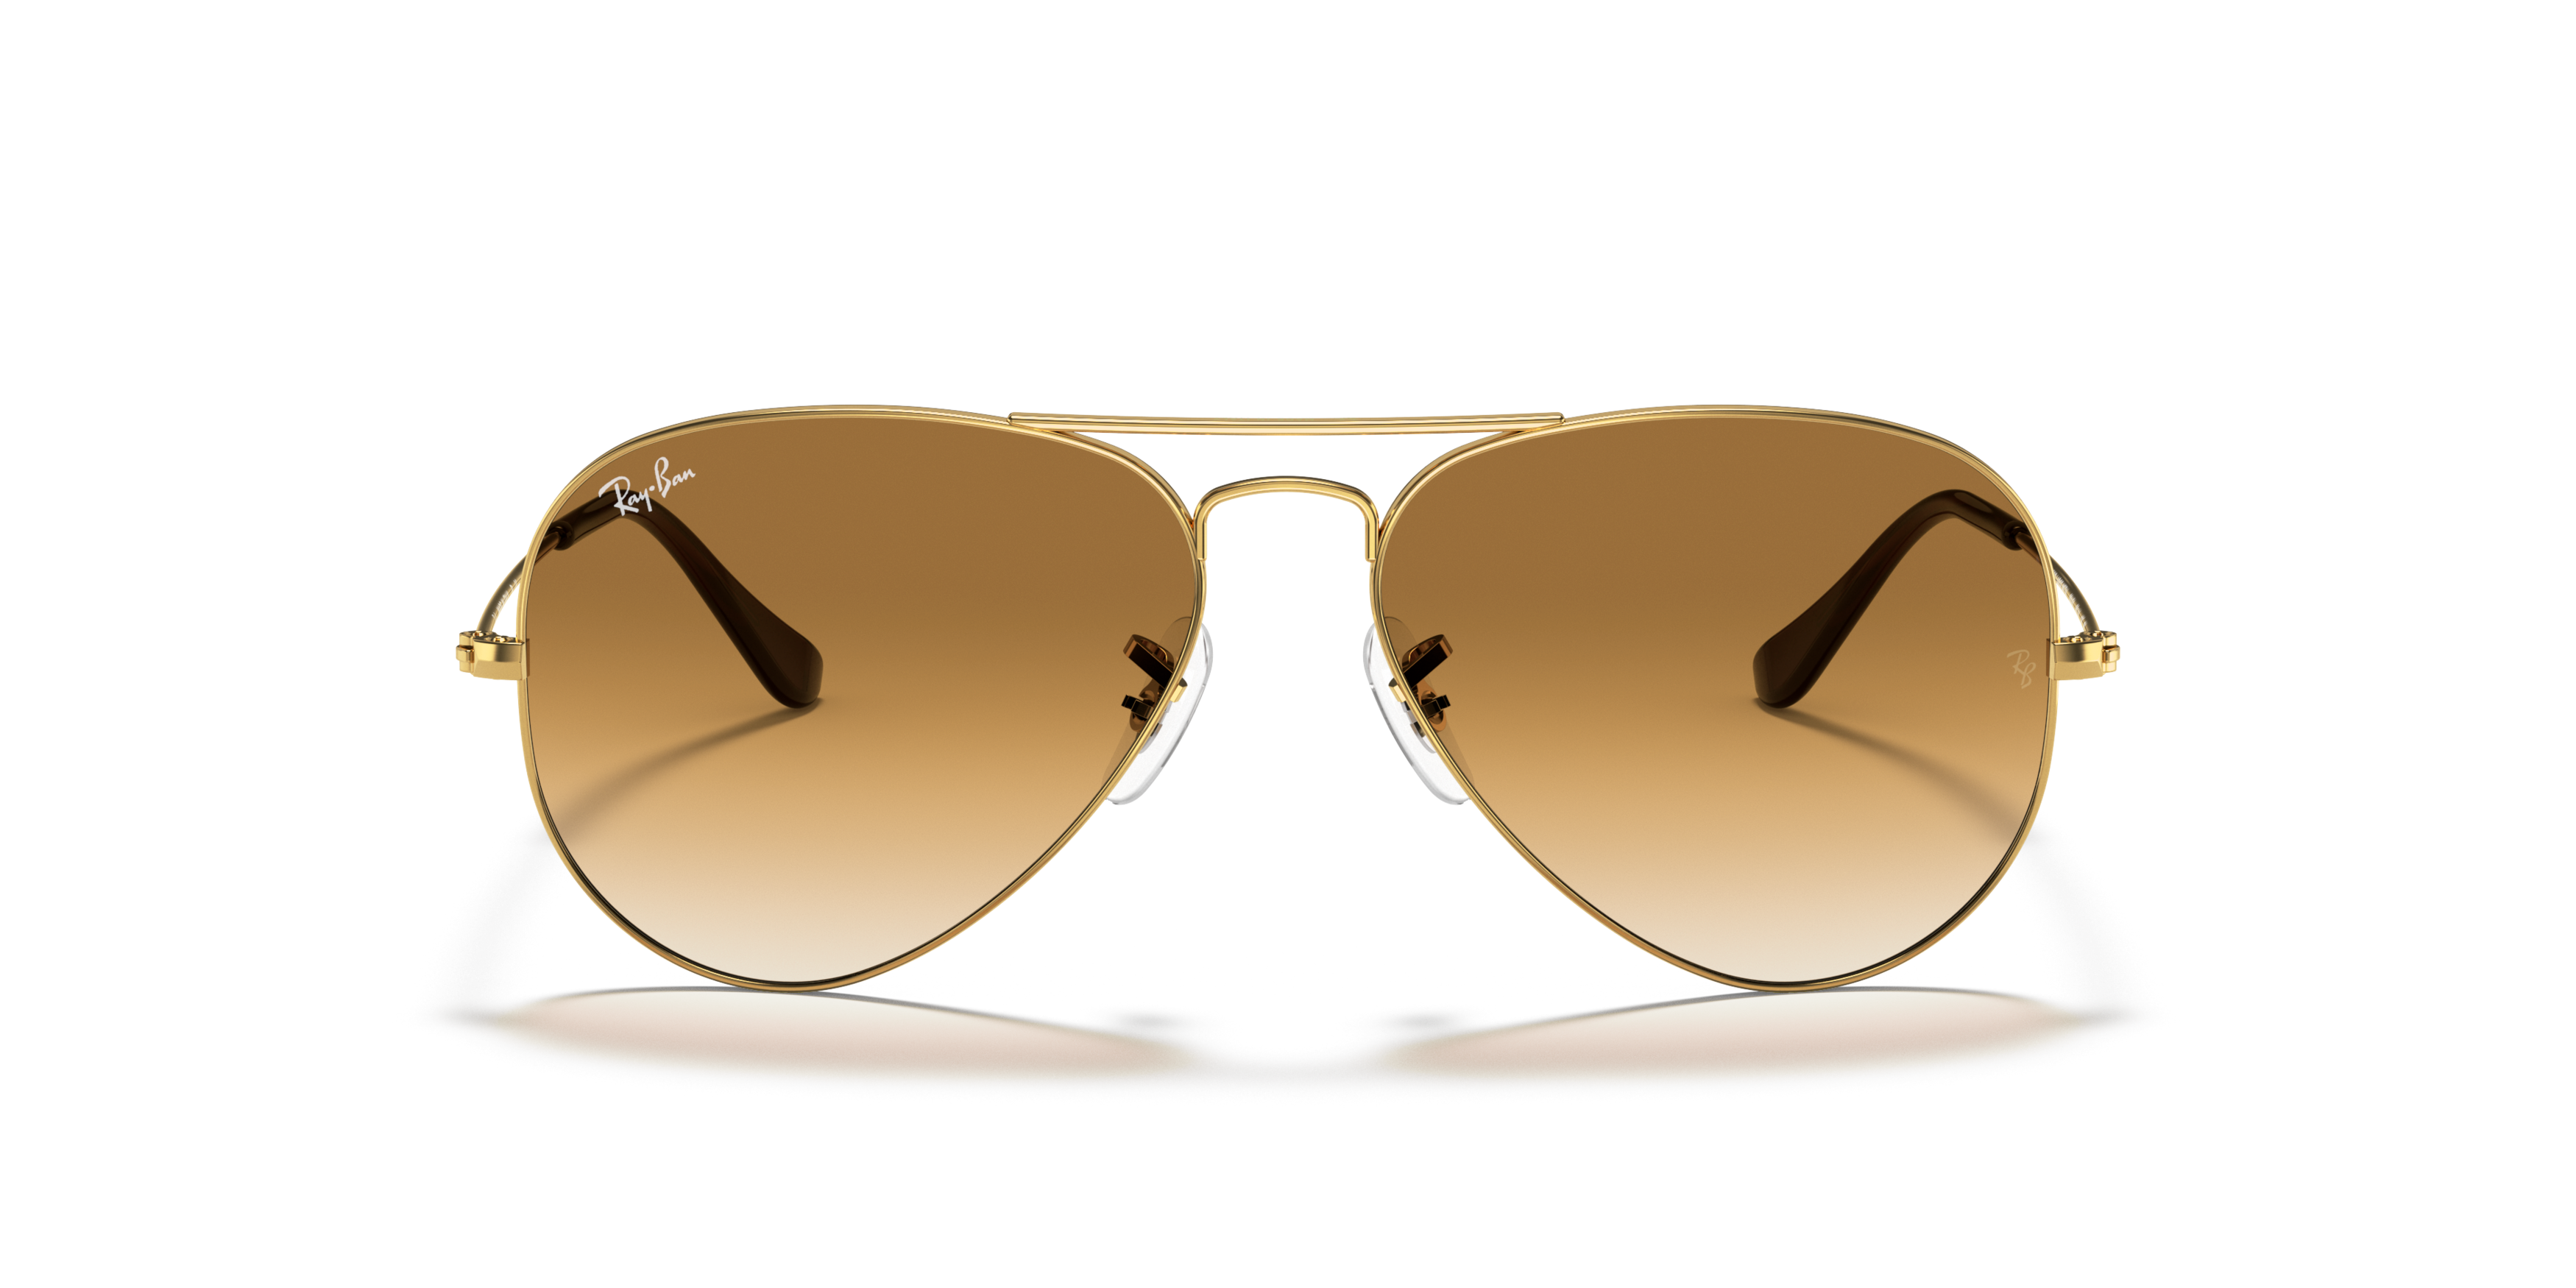 [products.image.front] Ray-Ban Aviator 0RB3025 001/51